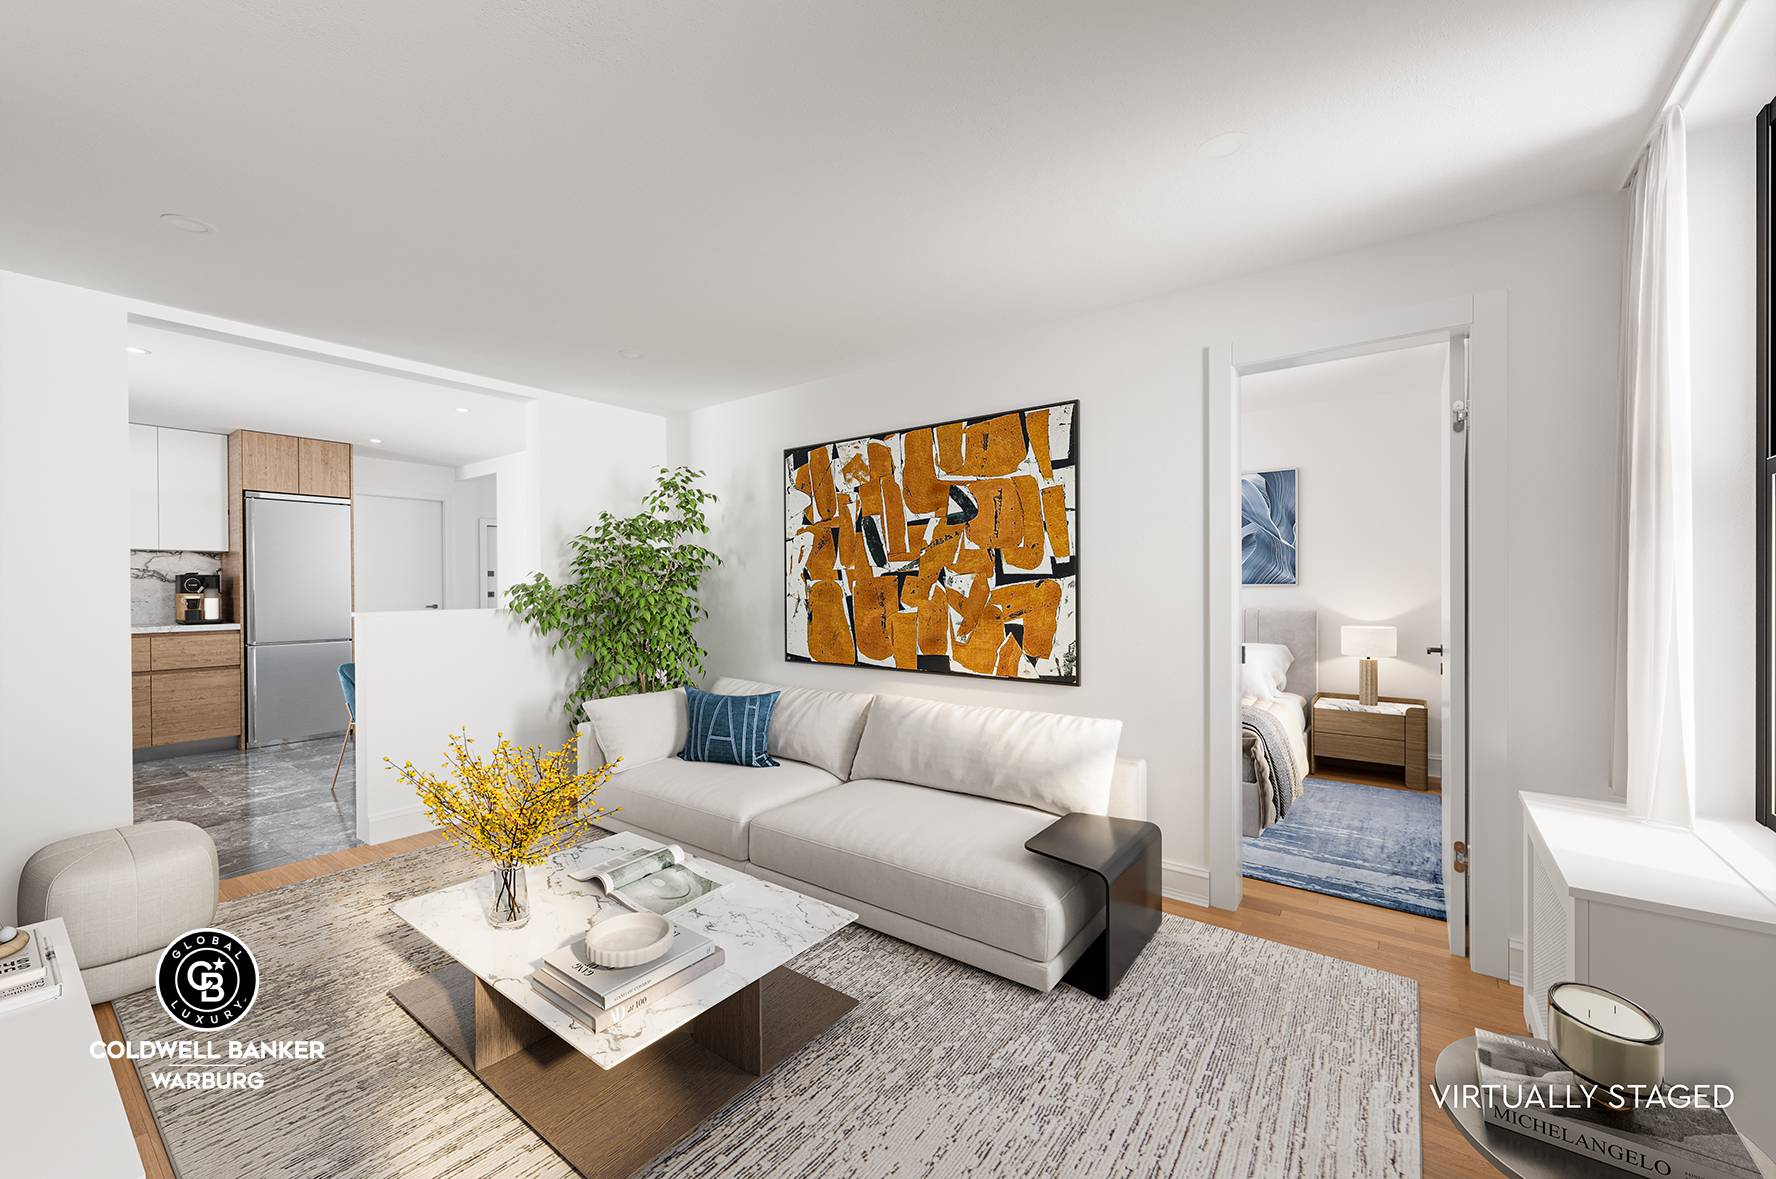 Welcome to apartment 3B, a two bed one bath, South and West facing apartment centrally located between the East Village and Lower East Side neighborhoods.